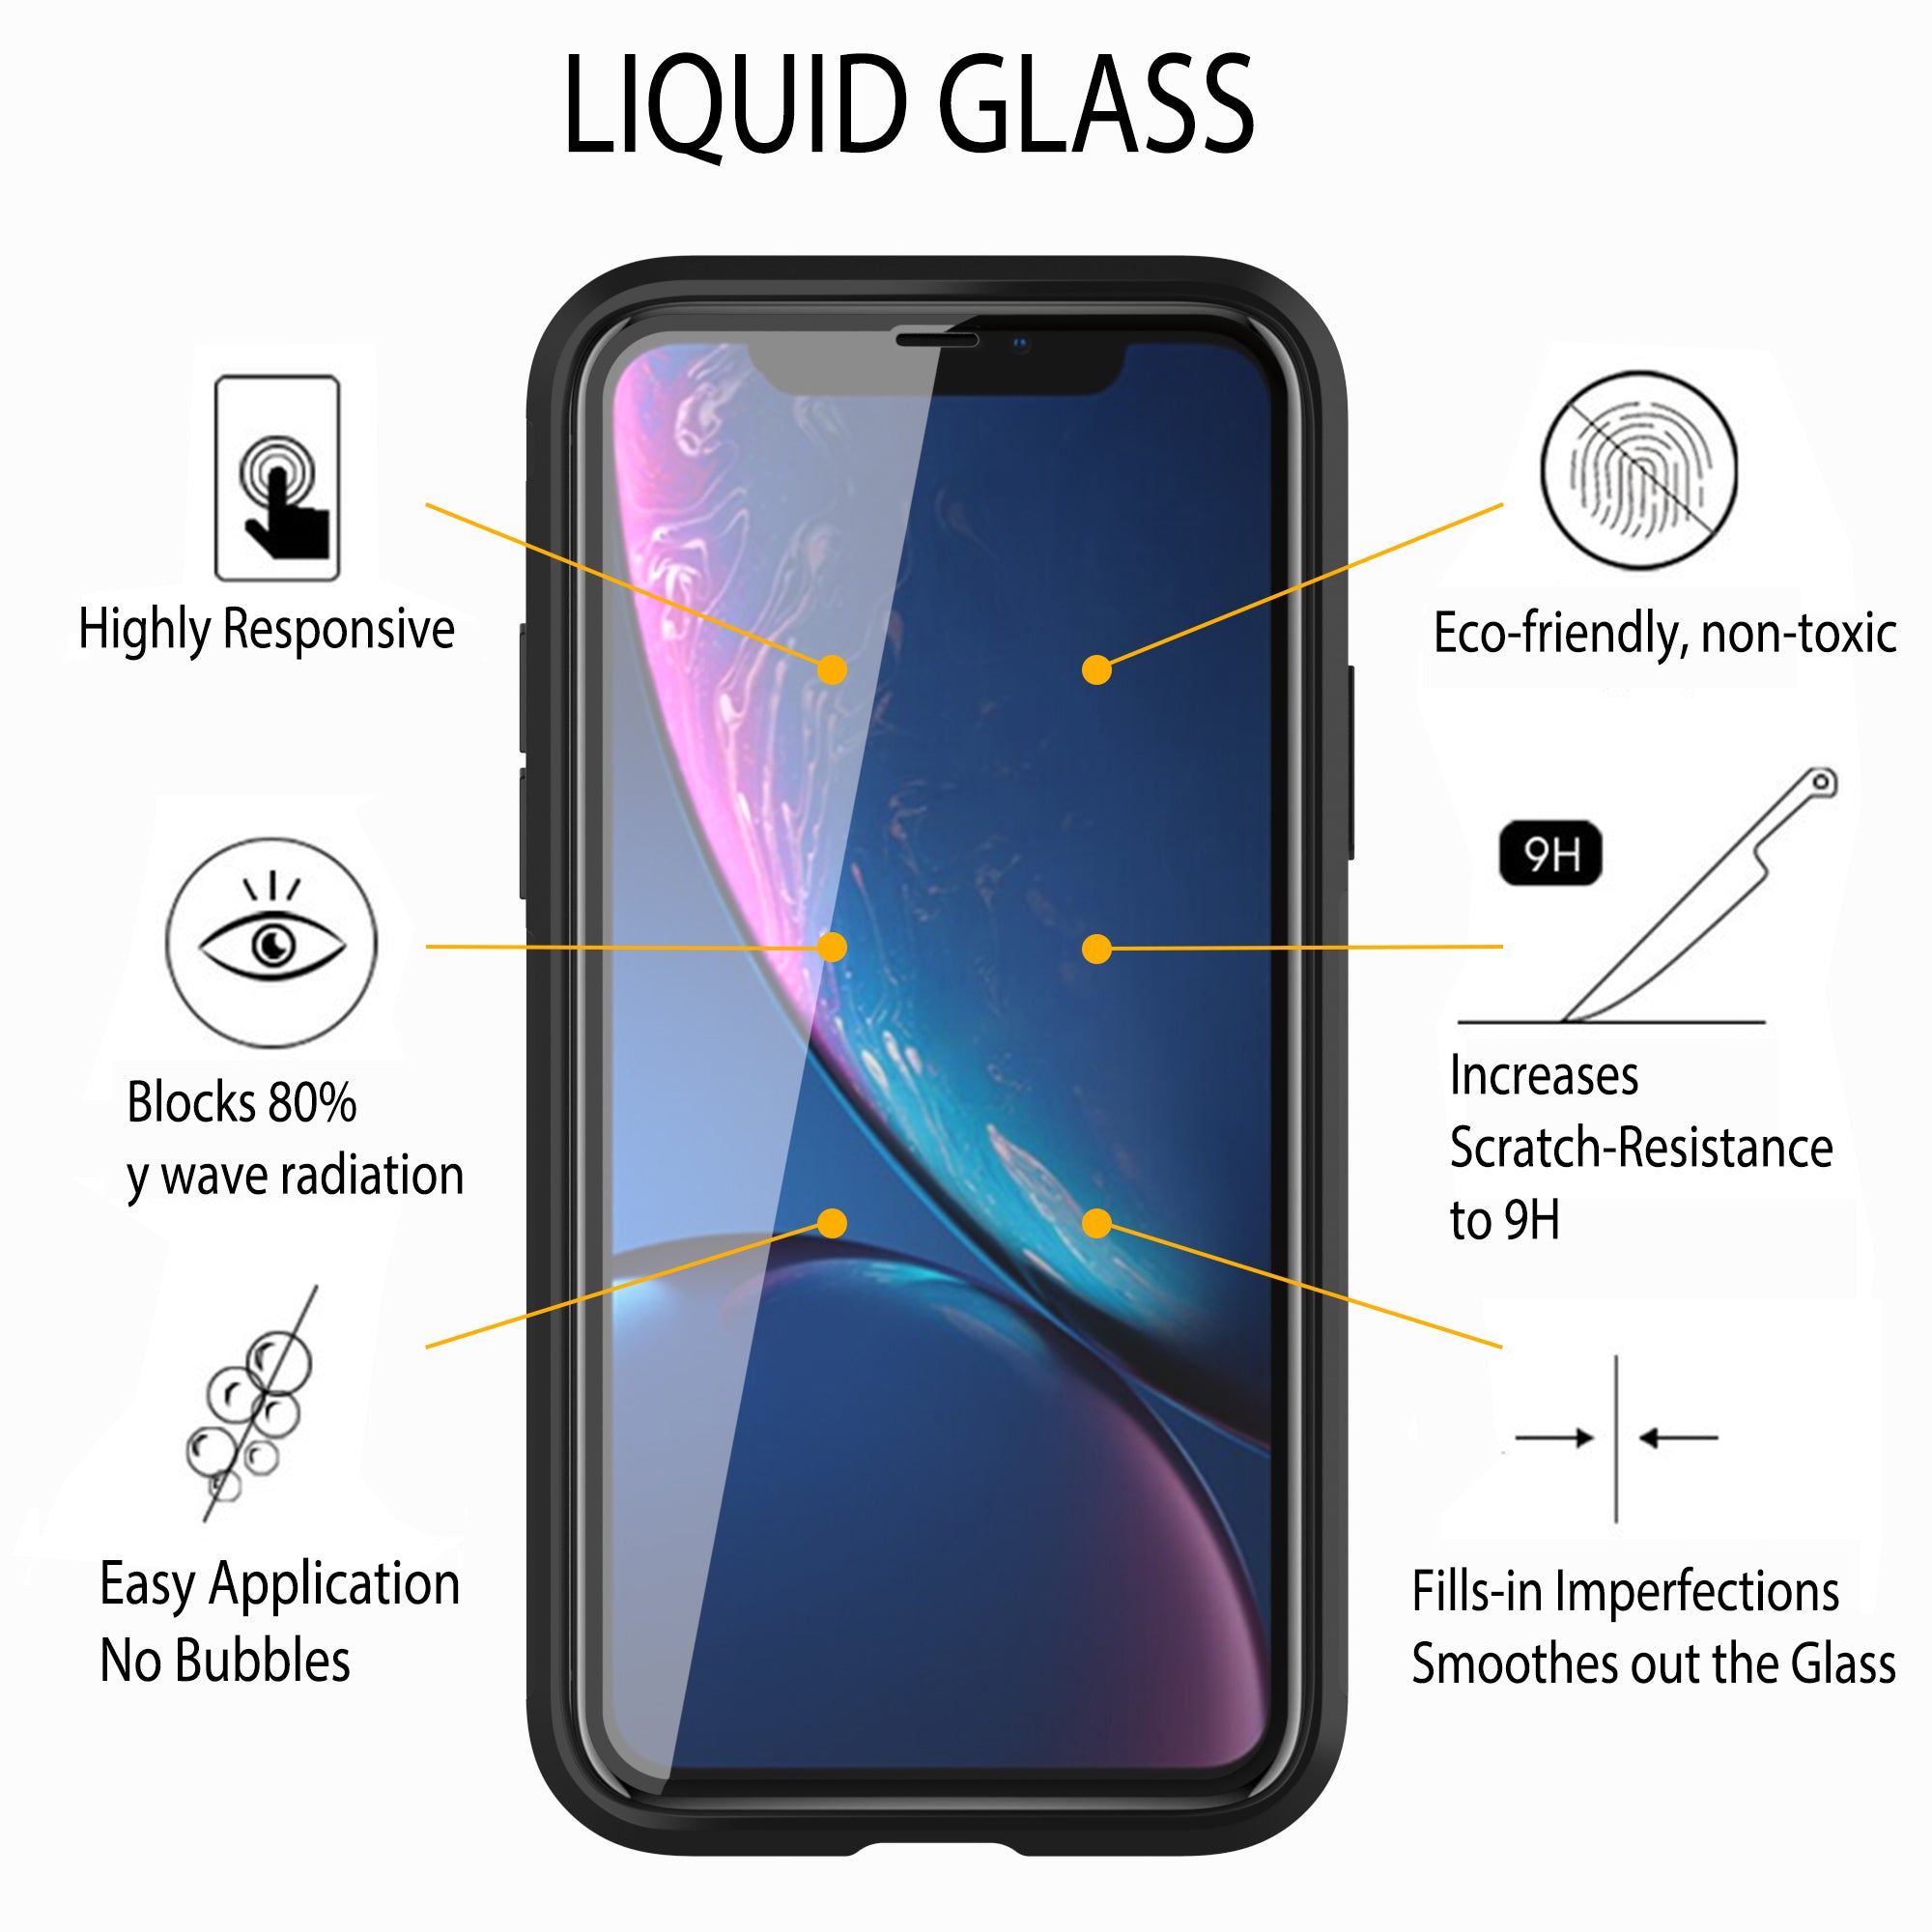 Luvvitt $250 Warranty CLEAR VIEW Case + Liquid Glass Screen Protector Bundle for iPhone 11 Pro 2019